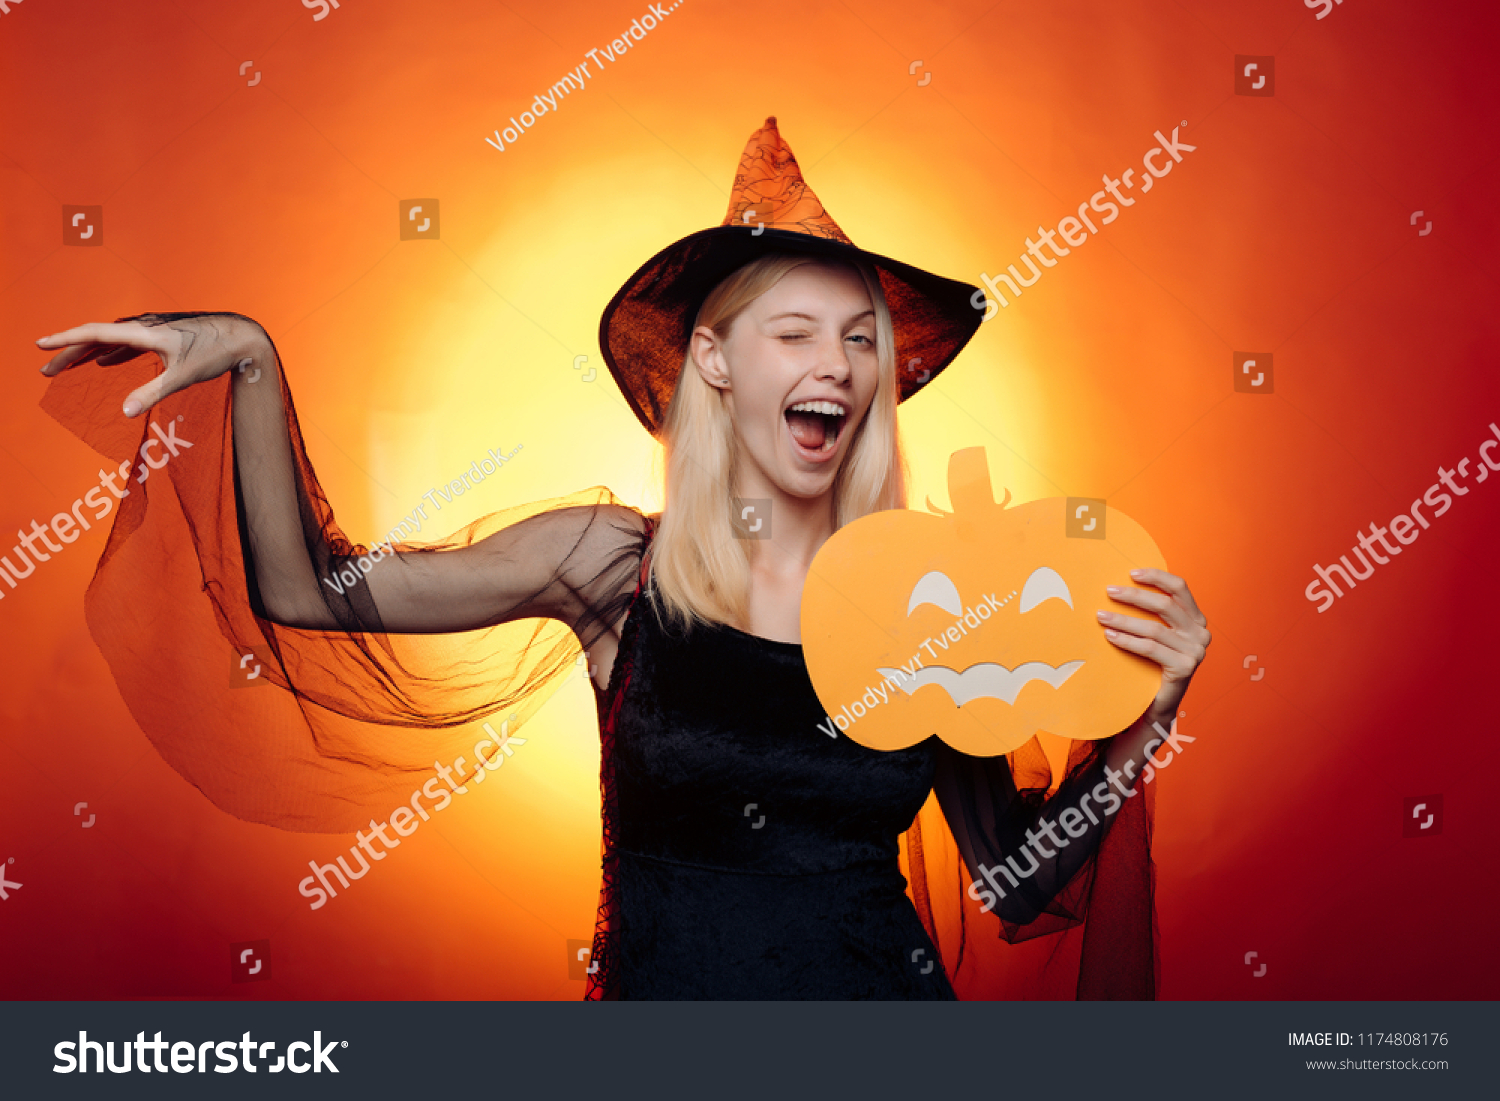 The Most Popular Candy for Halloween. Halloween dresses and witch costumes and witch hats. Witch hat. Happy Halloween Quotes for Spooky Fun. 31 october. Happy Halloween Stickers #1174808176